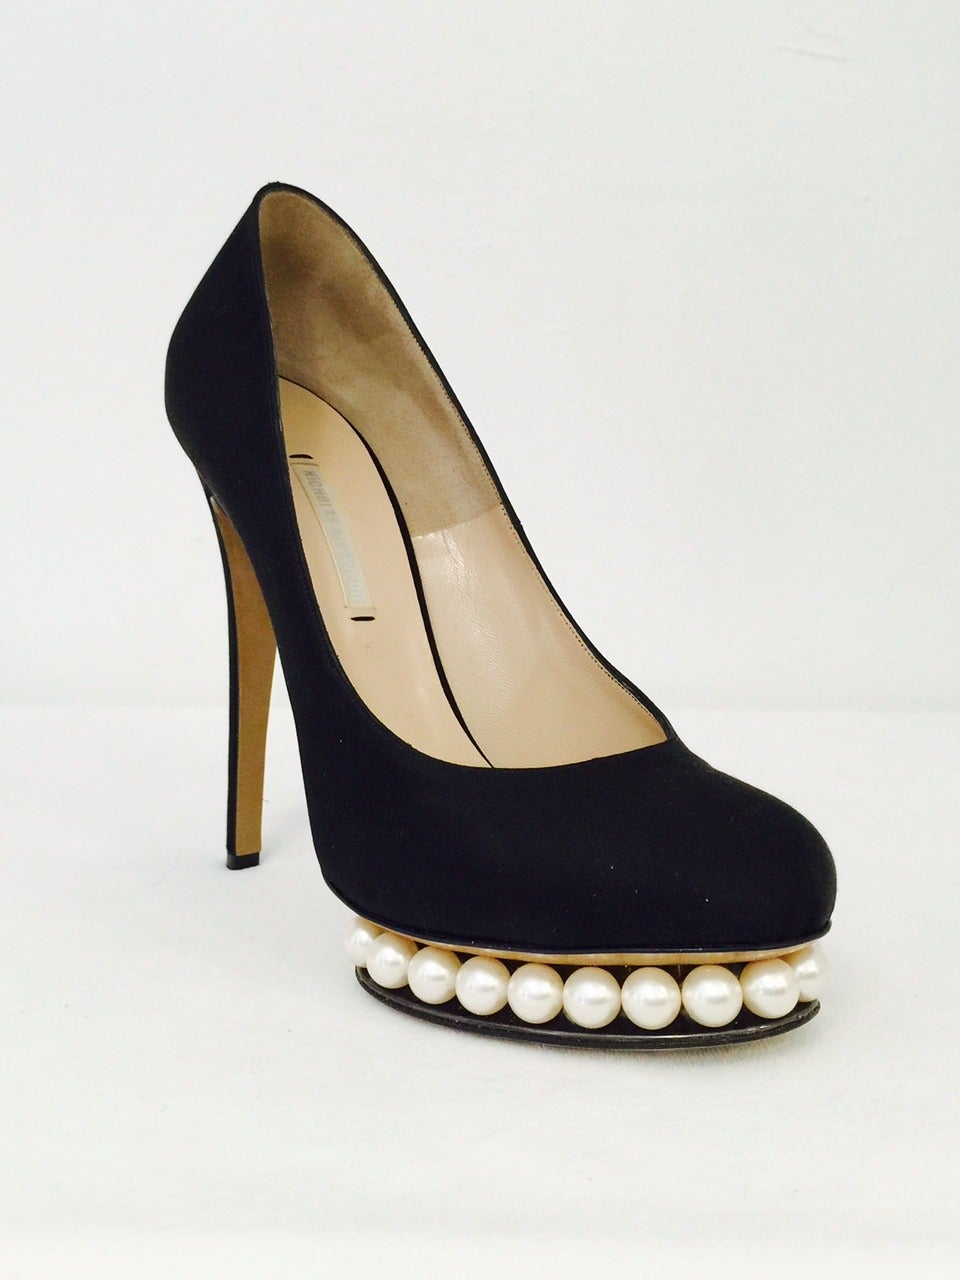 New NIcholas Kirkwood Casati Pearl Platform Satin Pumps In New Condition For Sale In Palm Beach, FL